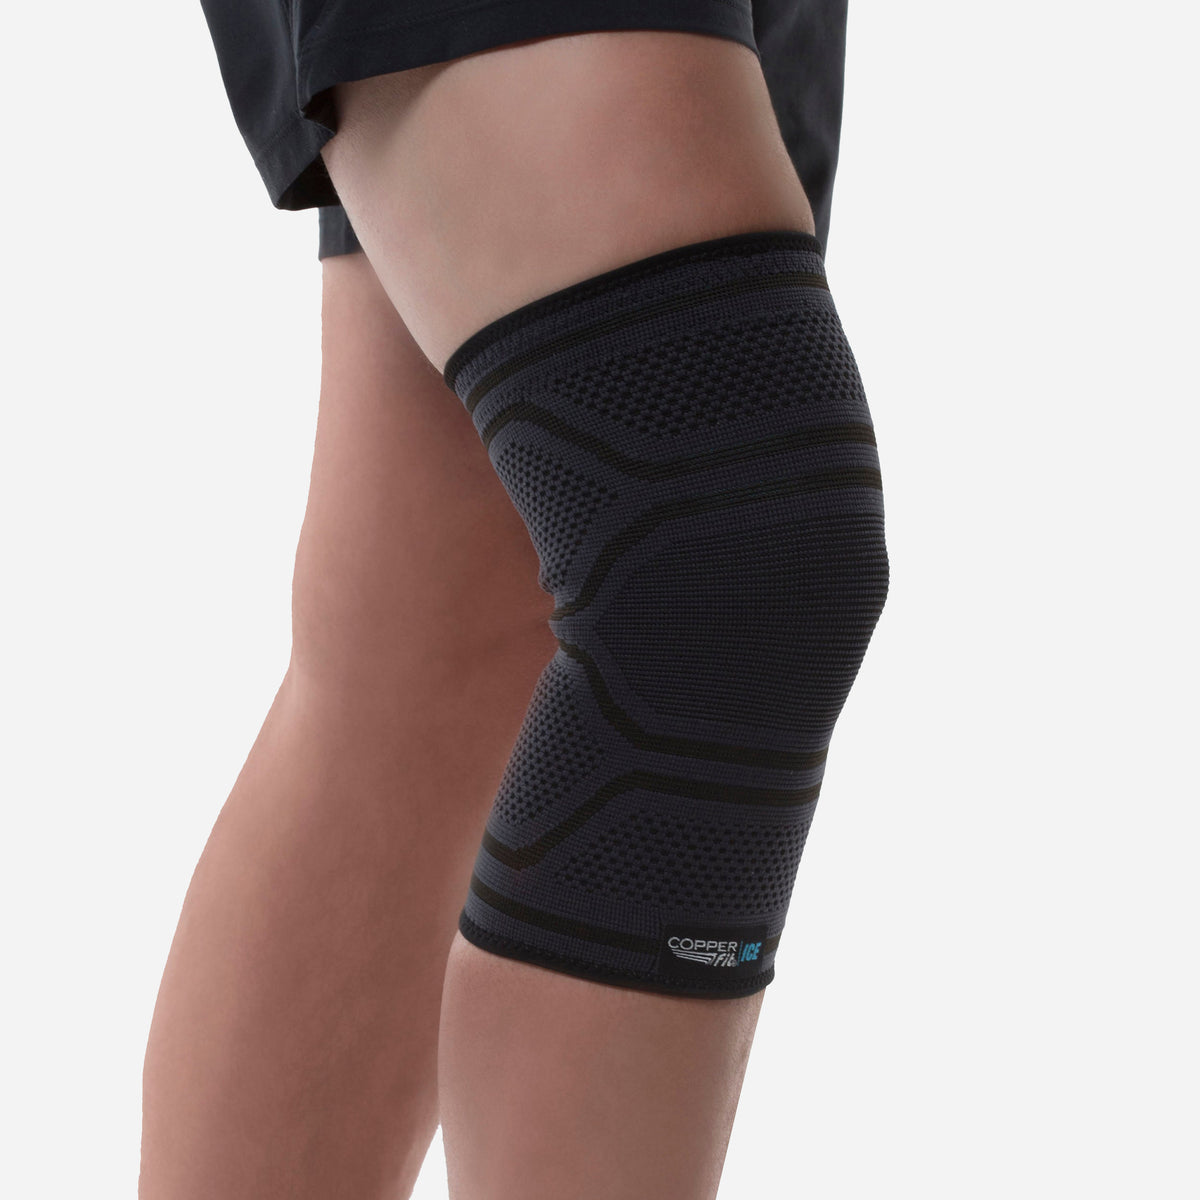 Idea Village Copper Fit Knee Supports with Hot / Cold Therapy